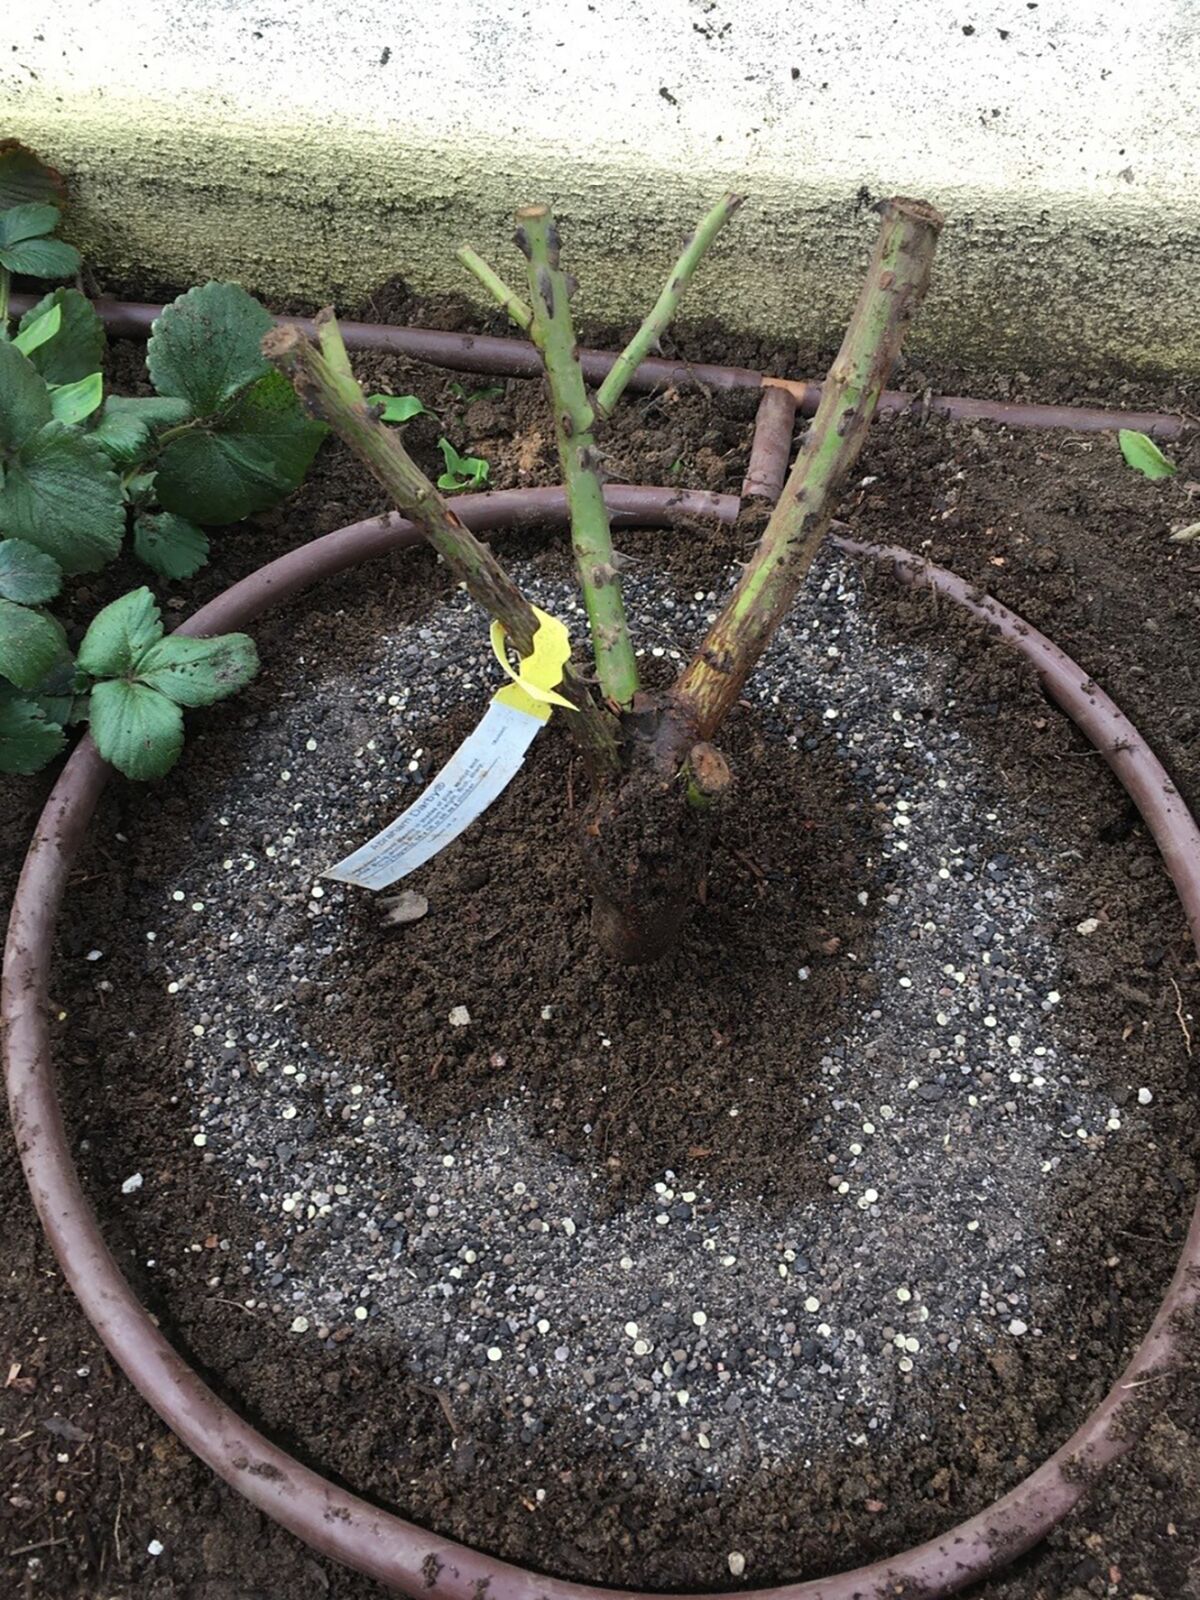 A Netafim drip irrigation system is laid on the soil around a rosebush and is covered with a 3-inch layer of mulch.